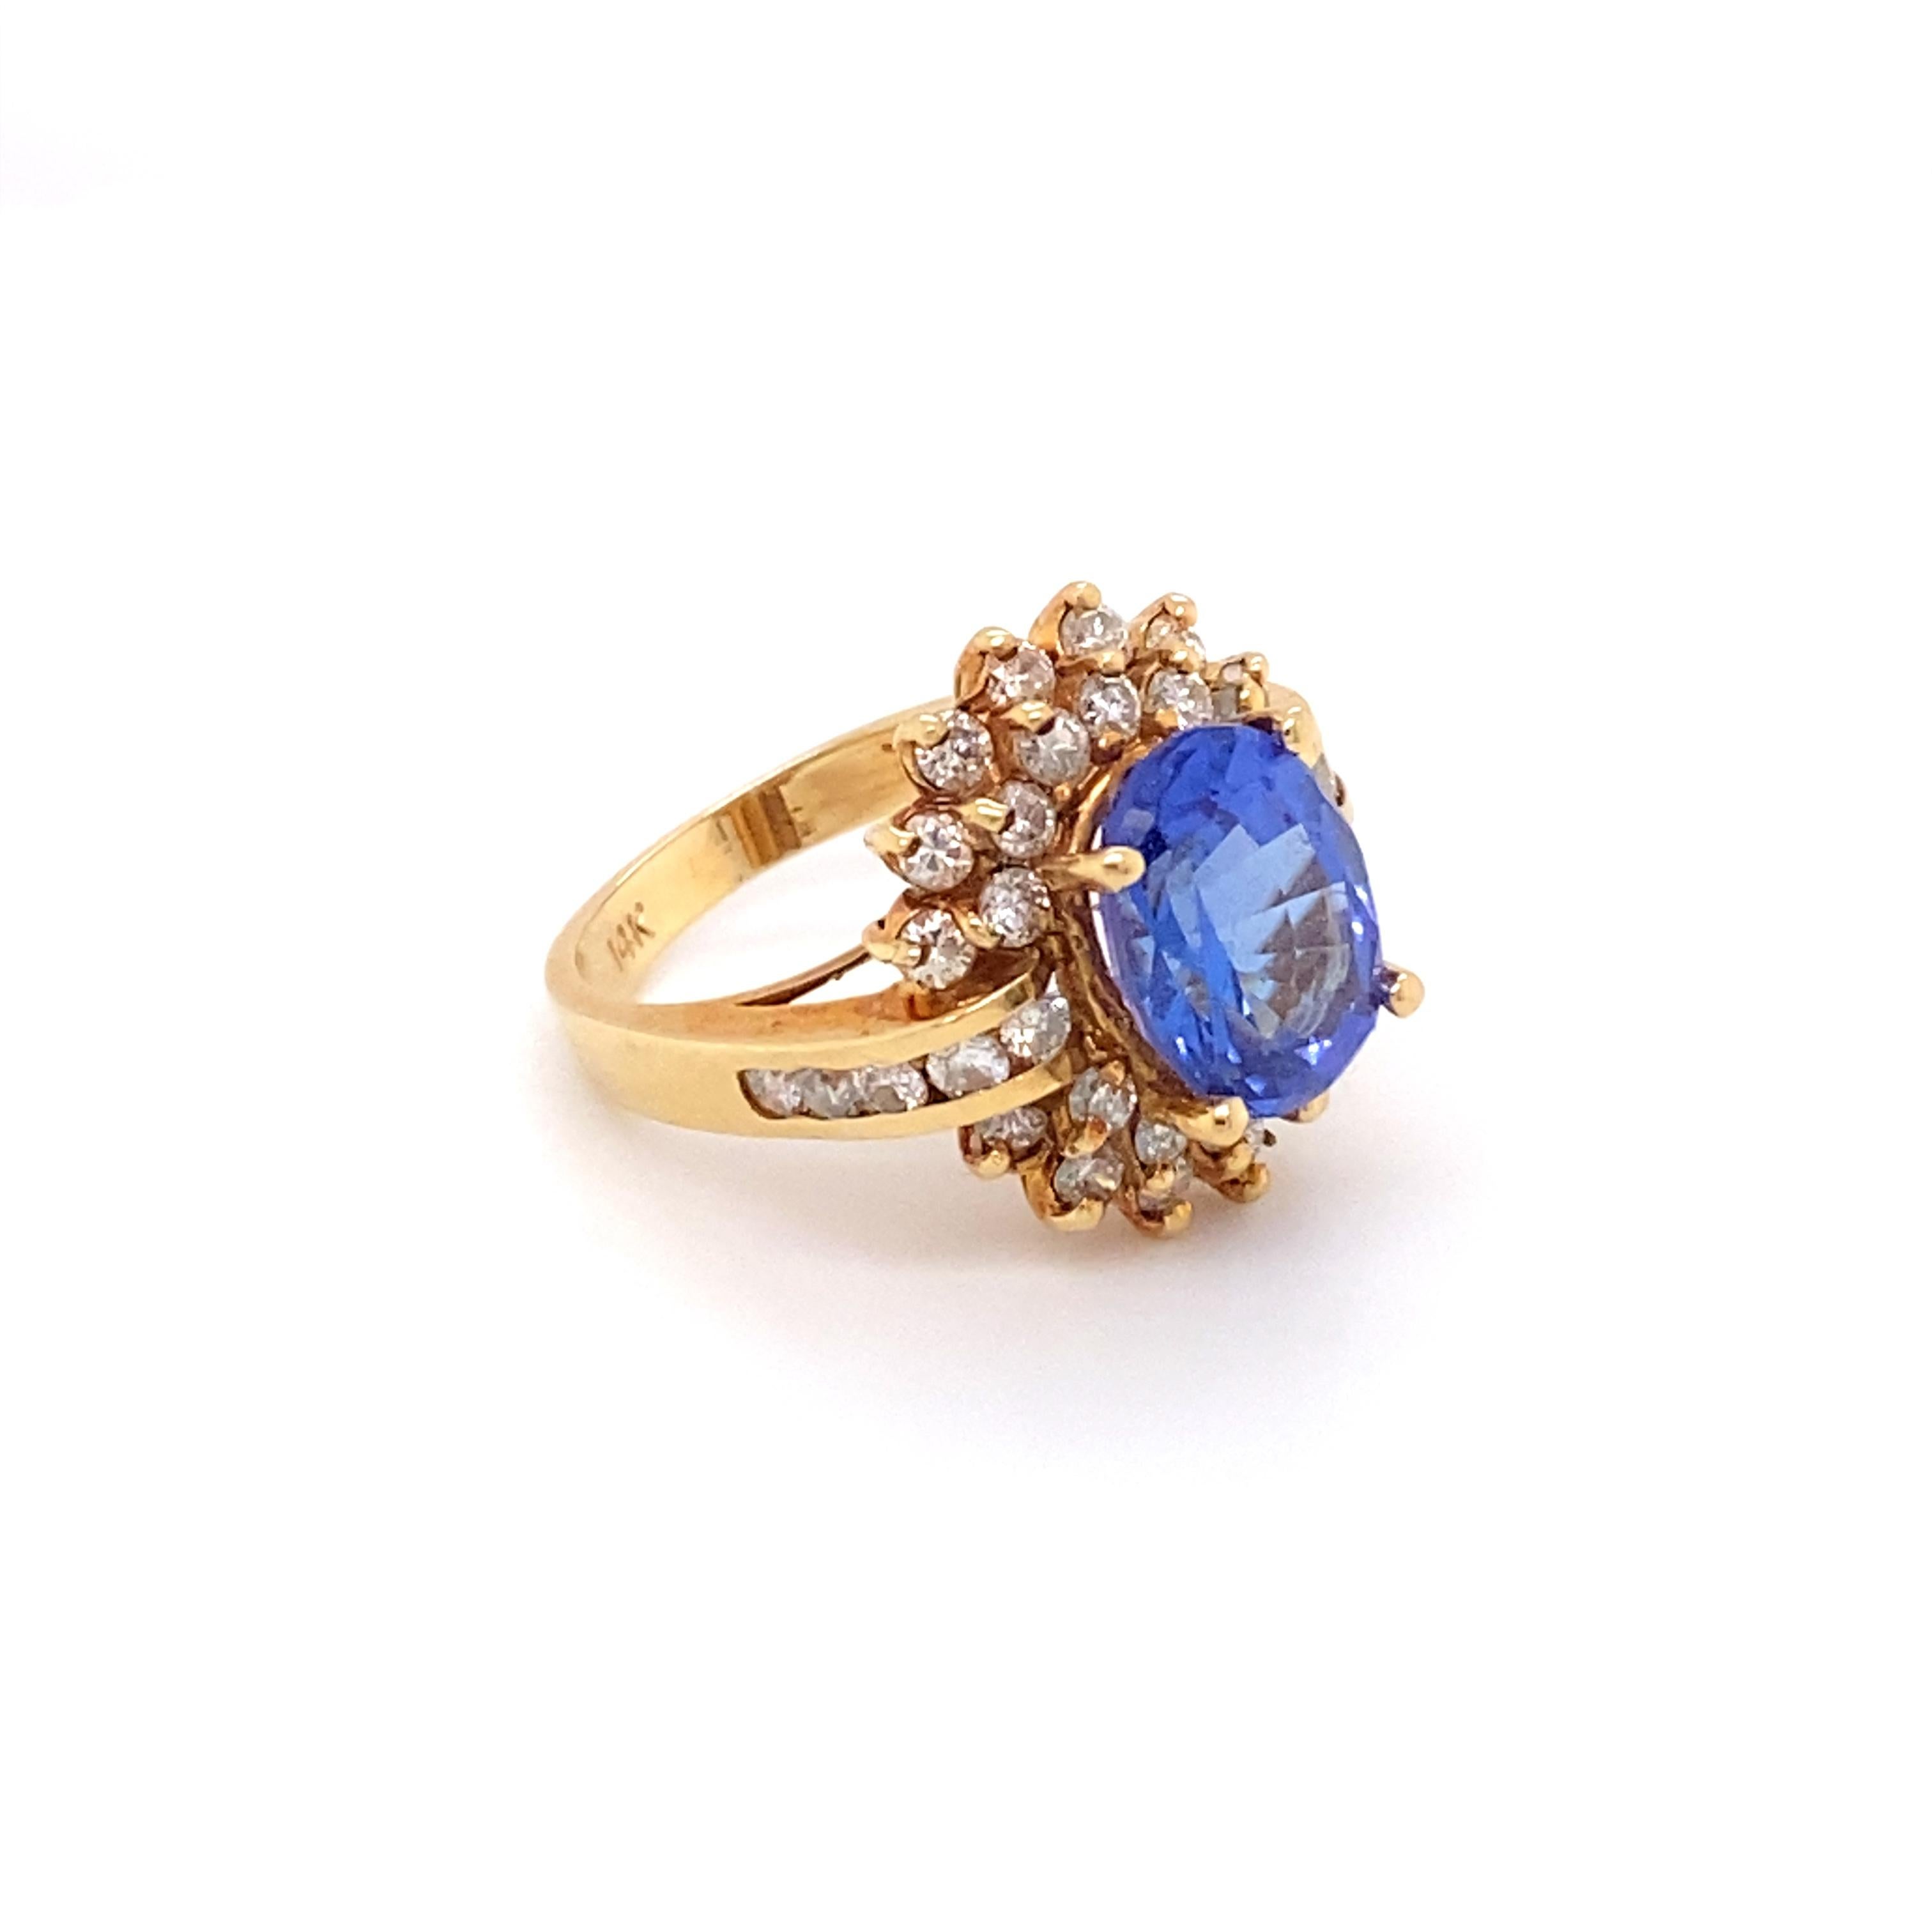 Metal Type: 14K yellow gold
Weight: 6.1 grams
Size: 4.75

Diamond Details:
Carat: .50 carat total weight
Color: G
Clarity: VS
Cut: Round

Sapphire:
Carat: 2 Carat Total
Cut: Oval
Color: Blue